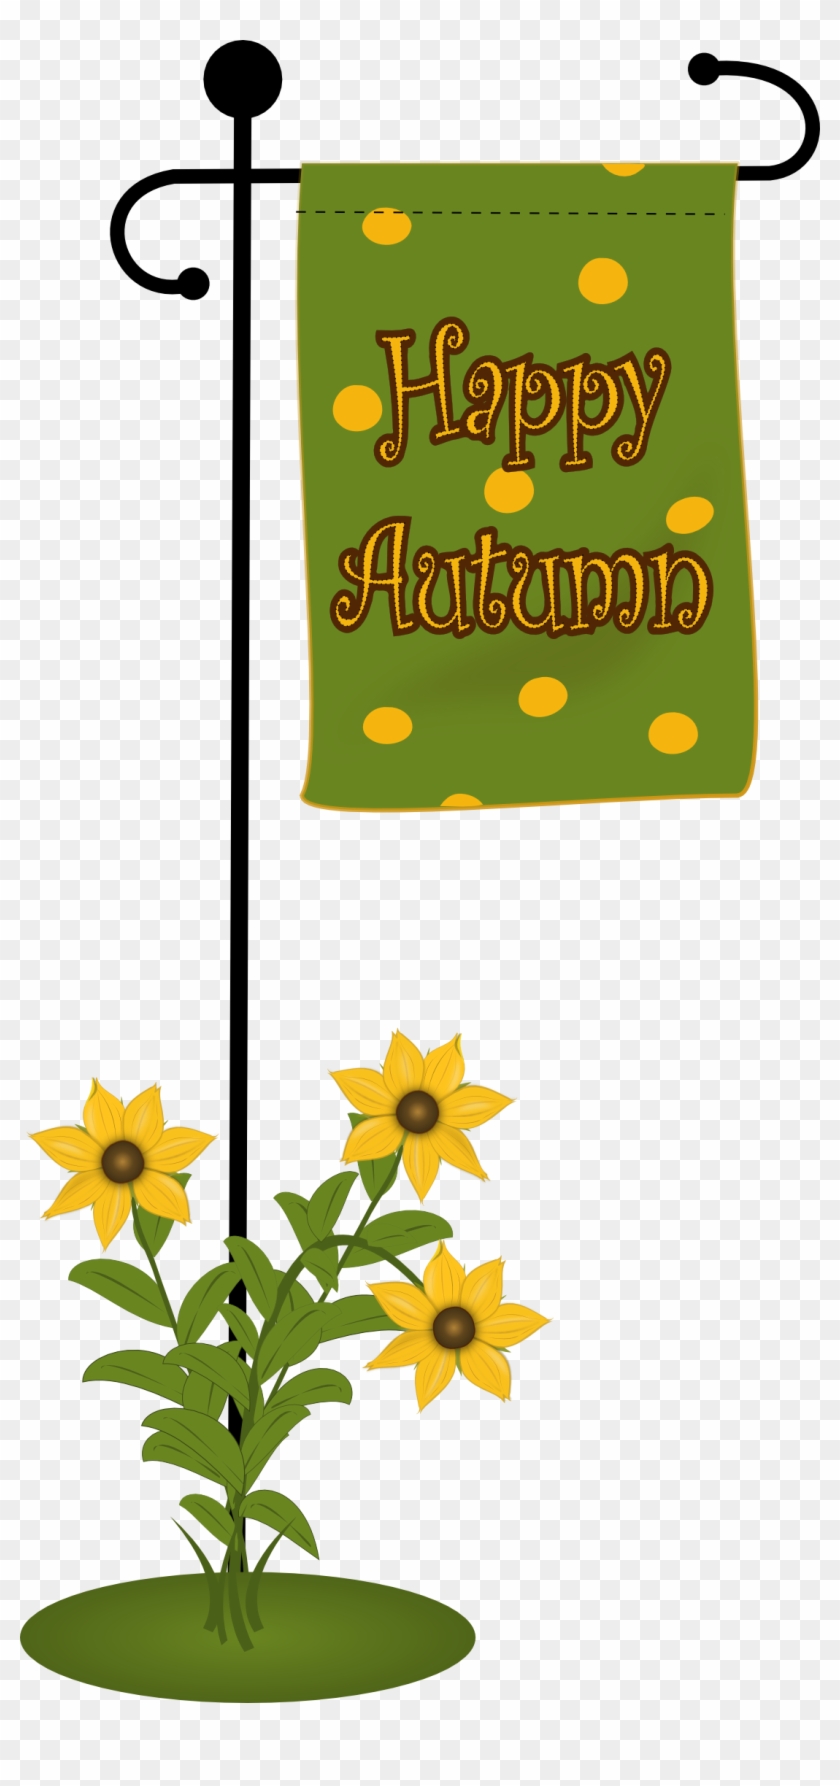 Happy Autumn Flag With Fowers - Black-eyed Susan #380161